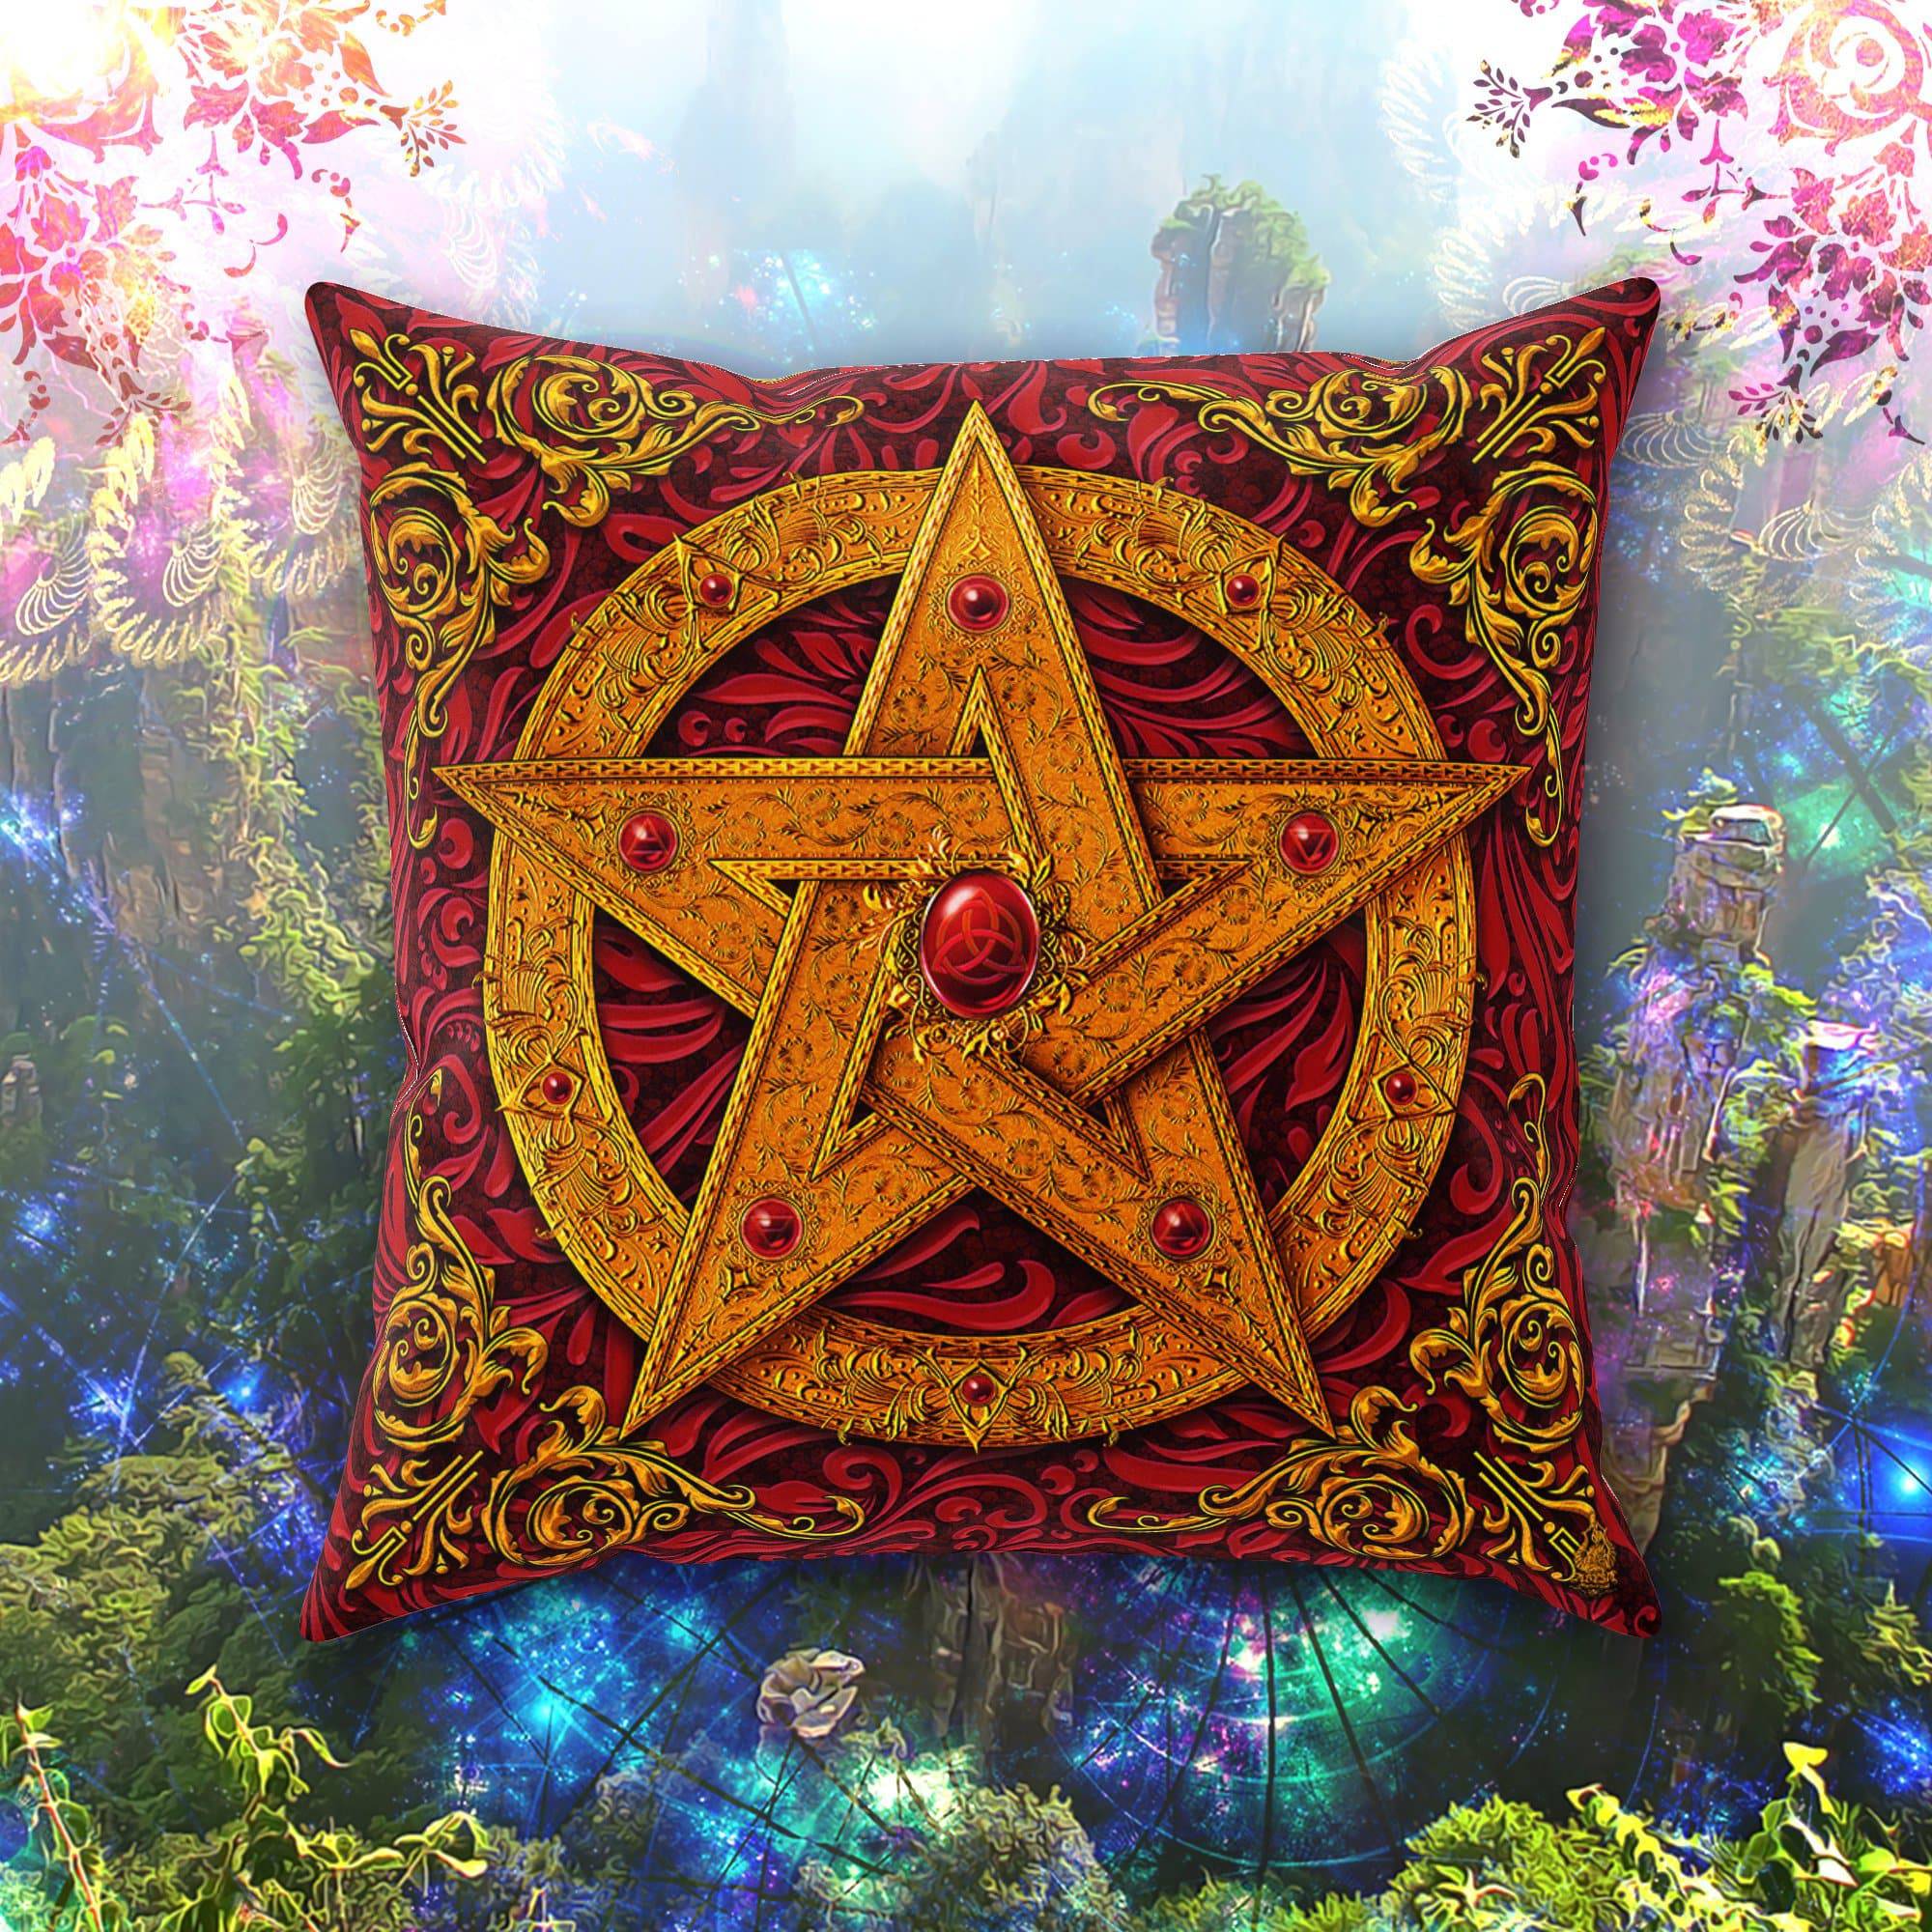 Pentacle Throw Pillow, Decorative Accent Cushion, Witch, Wicca Home Decor, Pagan Art, Funky and Eclectic Home - Red - Abysm Internal